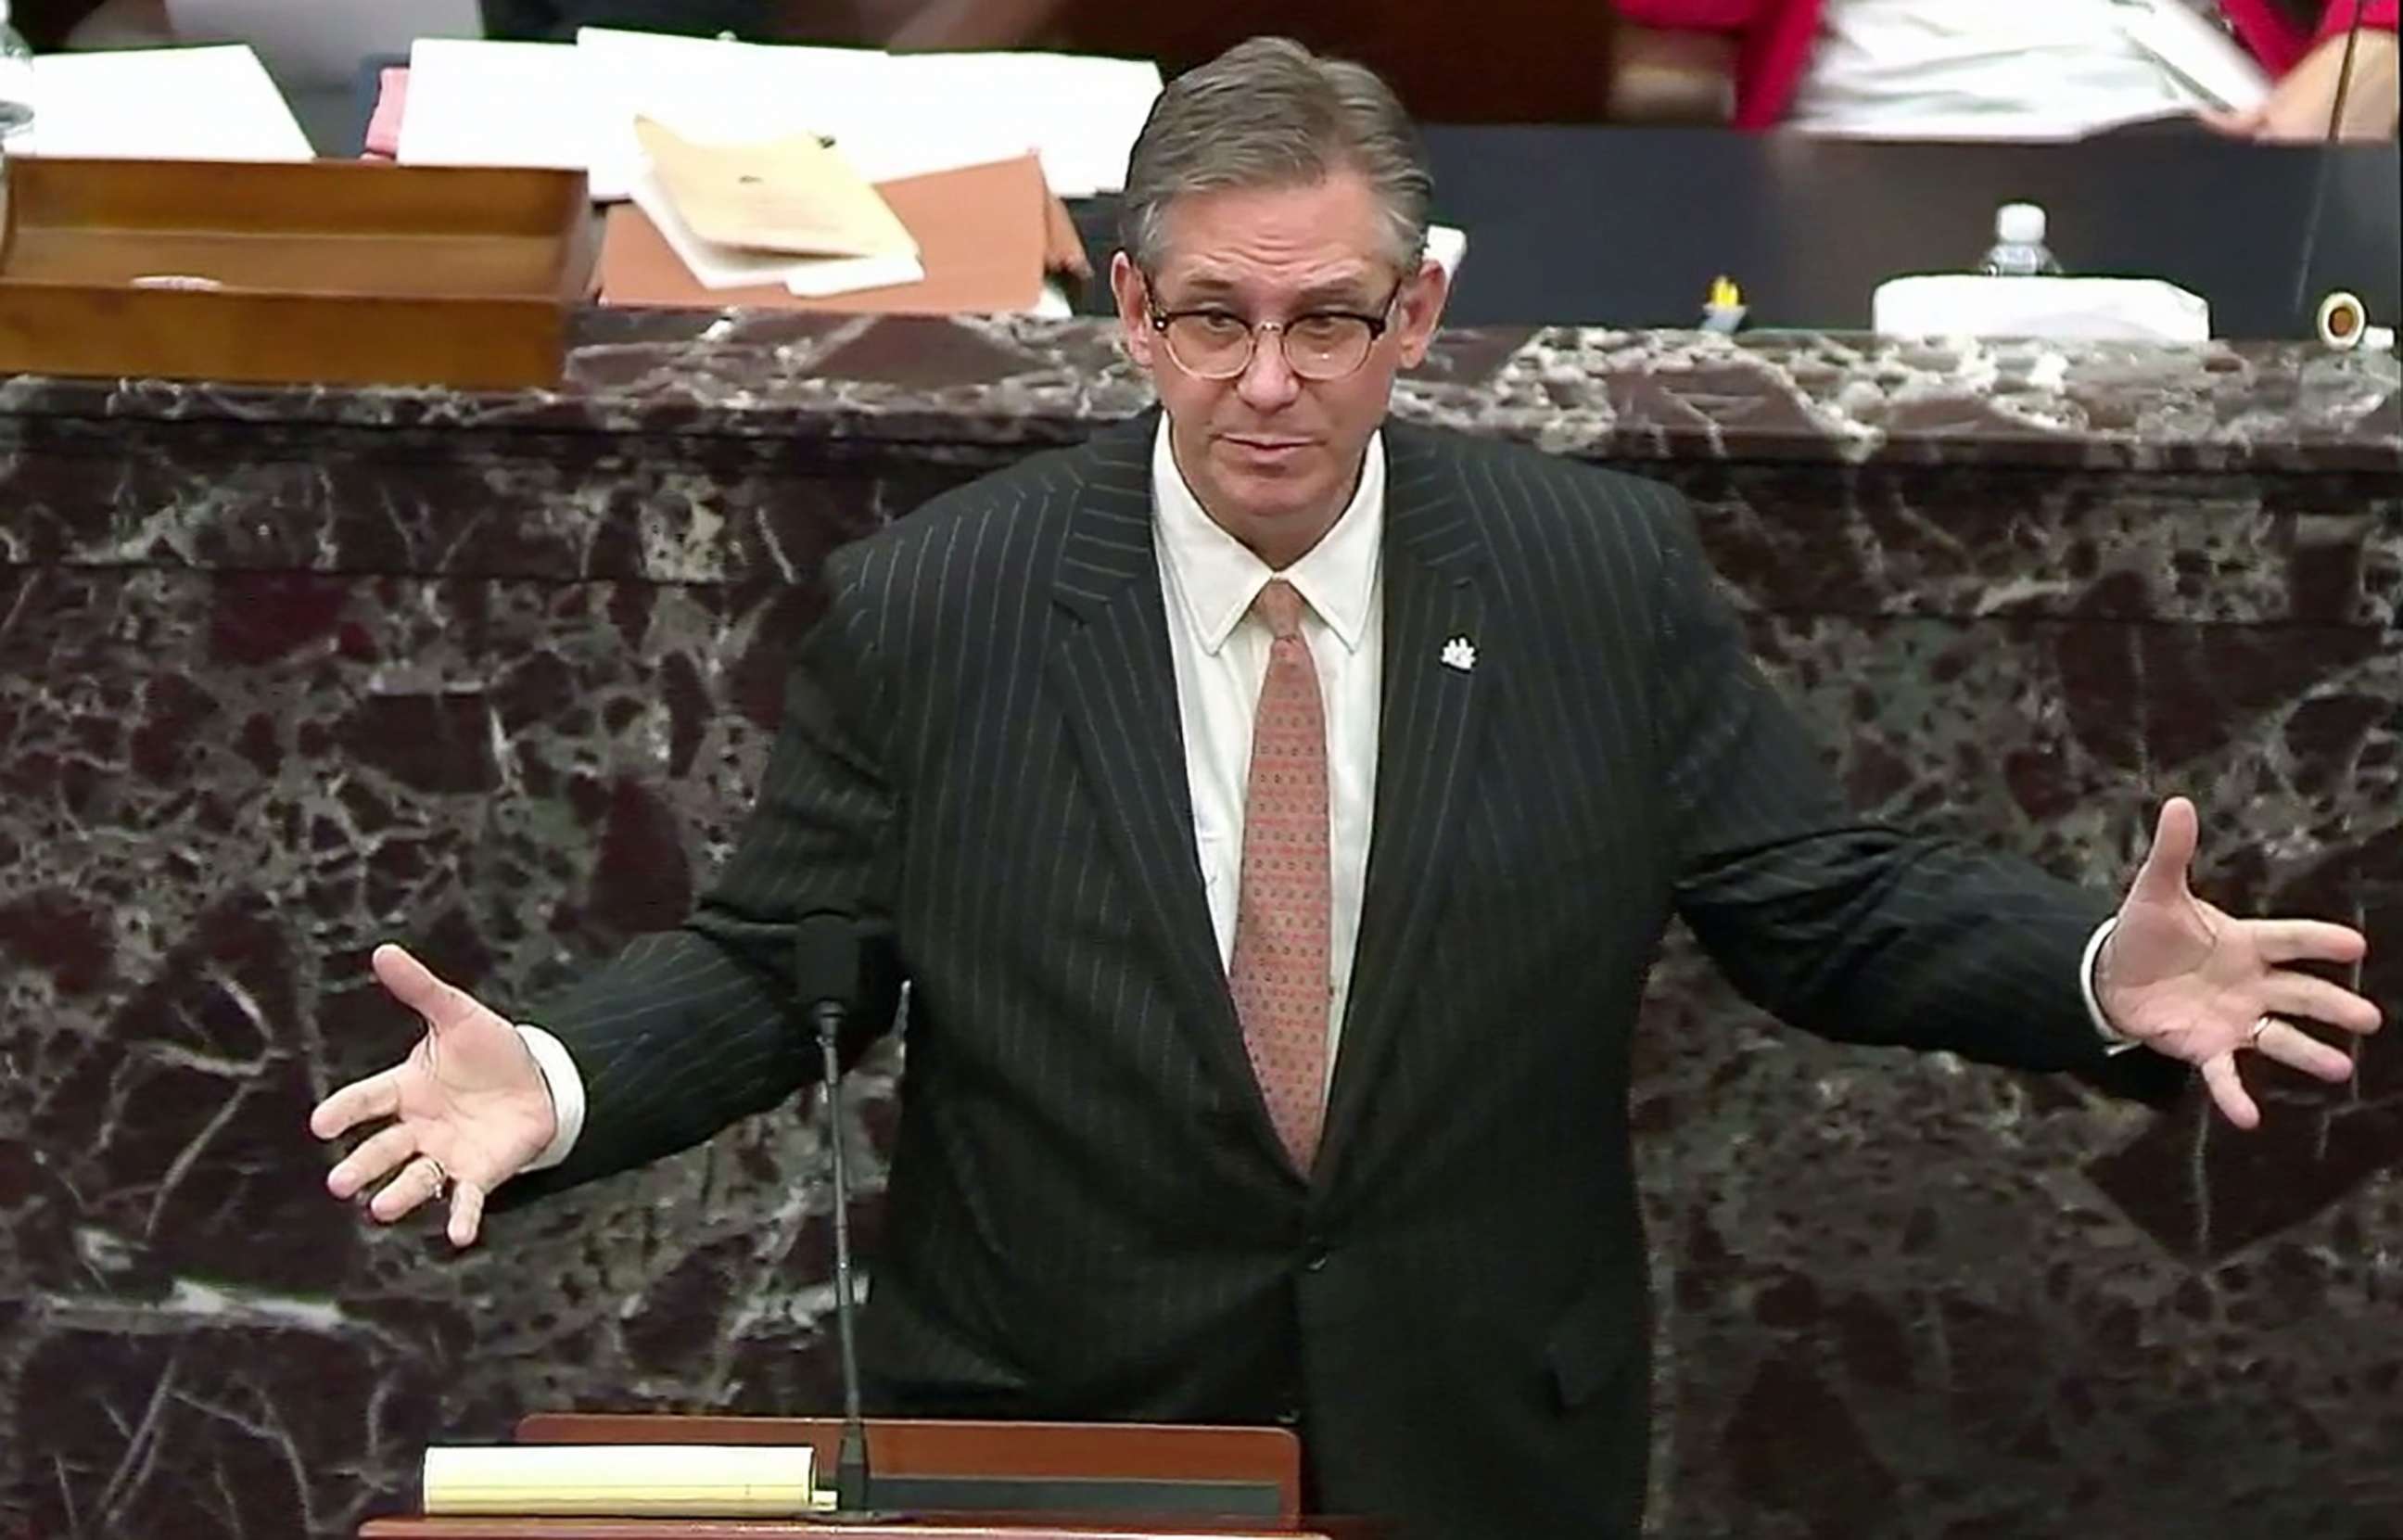 PHOTO: Attorney Bruce Castor, representing and defending former President Donald Trump, addresses the U.S. Senate as it begins the second impeachment trial, on charges of inciting the deadly attack on the U.S. Capitol, Feb. 9, 2021, in Washington, D.C.